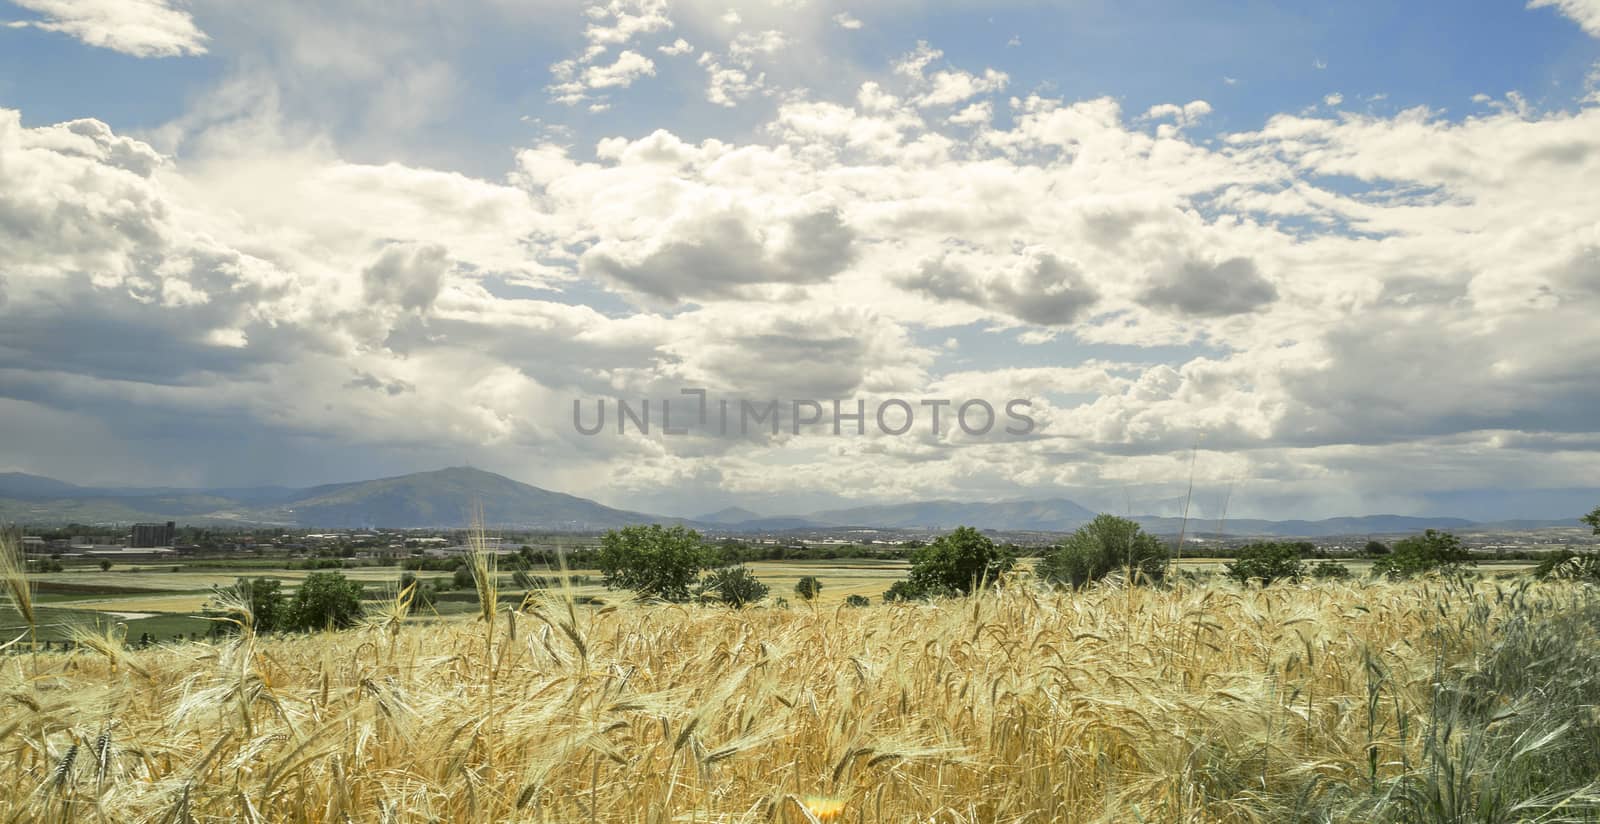 Golden wheat field on cloudy day